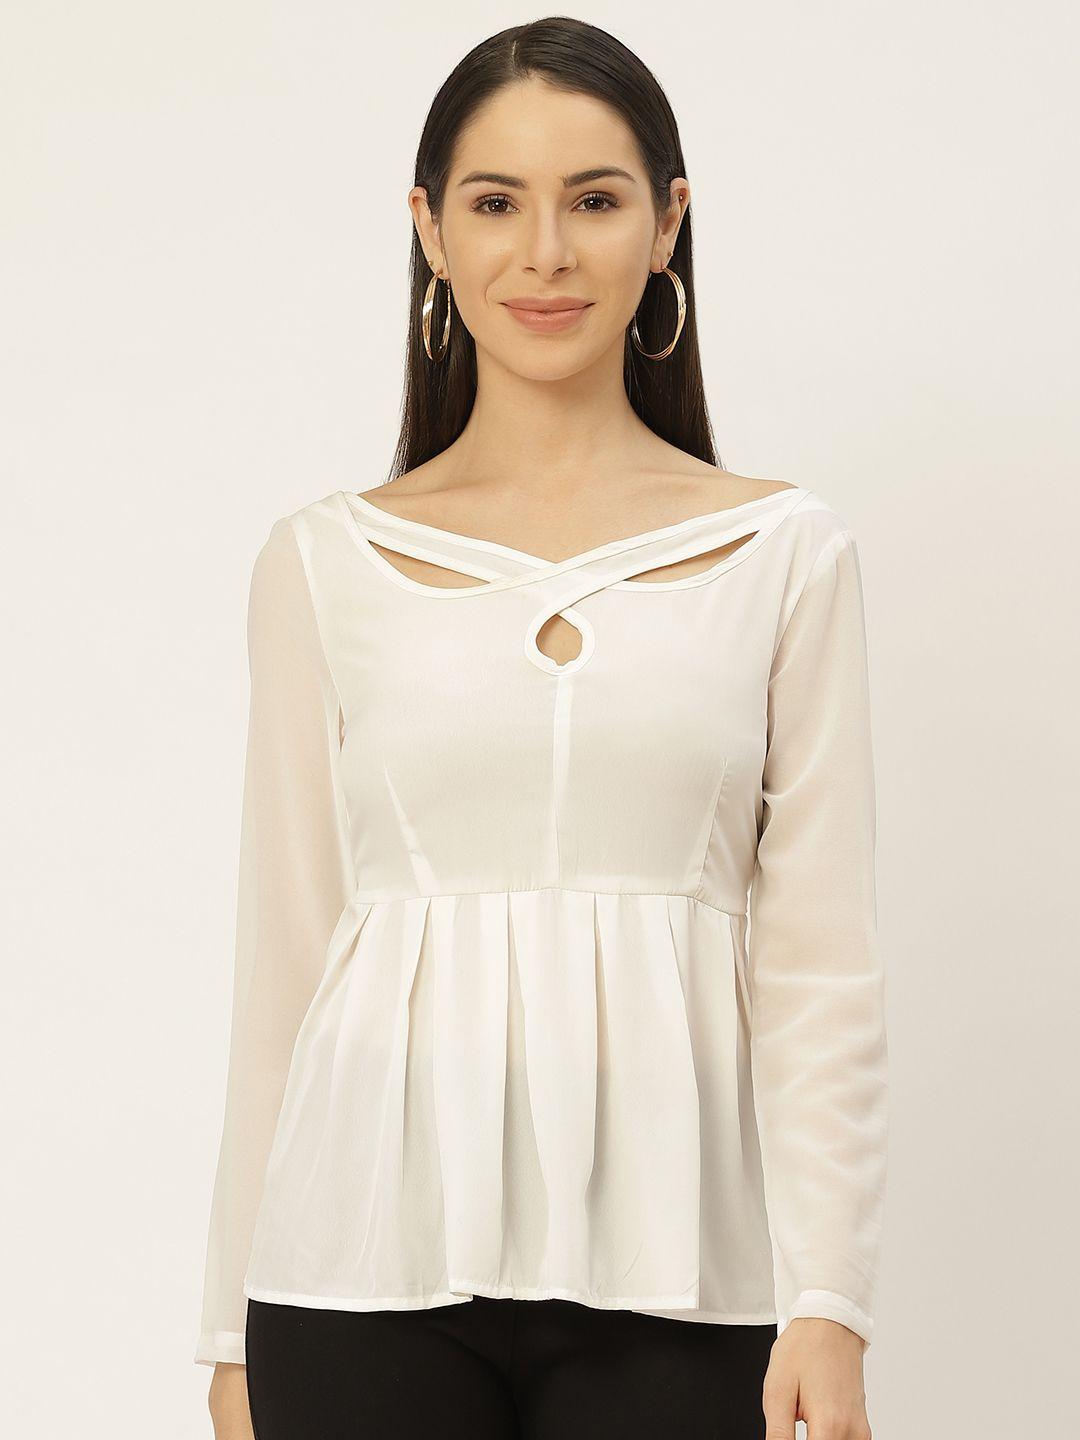 belle-fille-white-solid-cut-outs-crepe-peplum-top